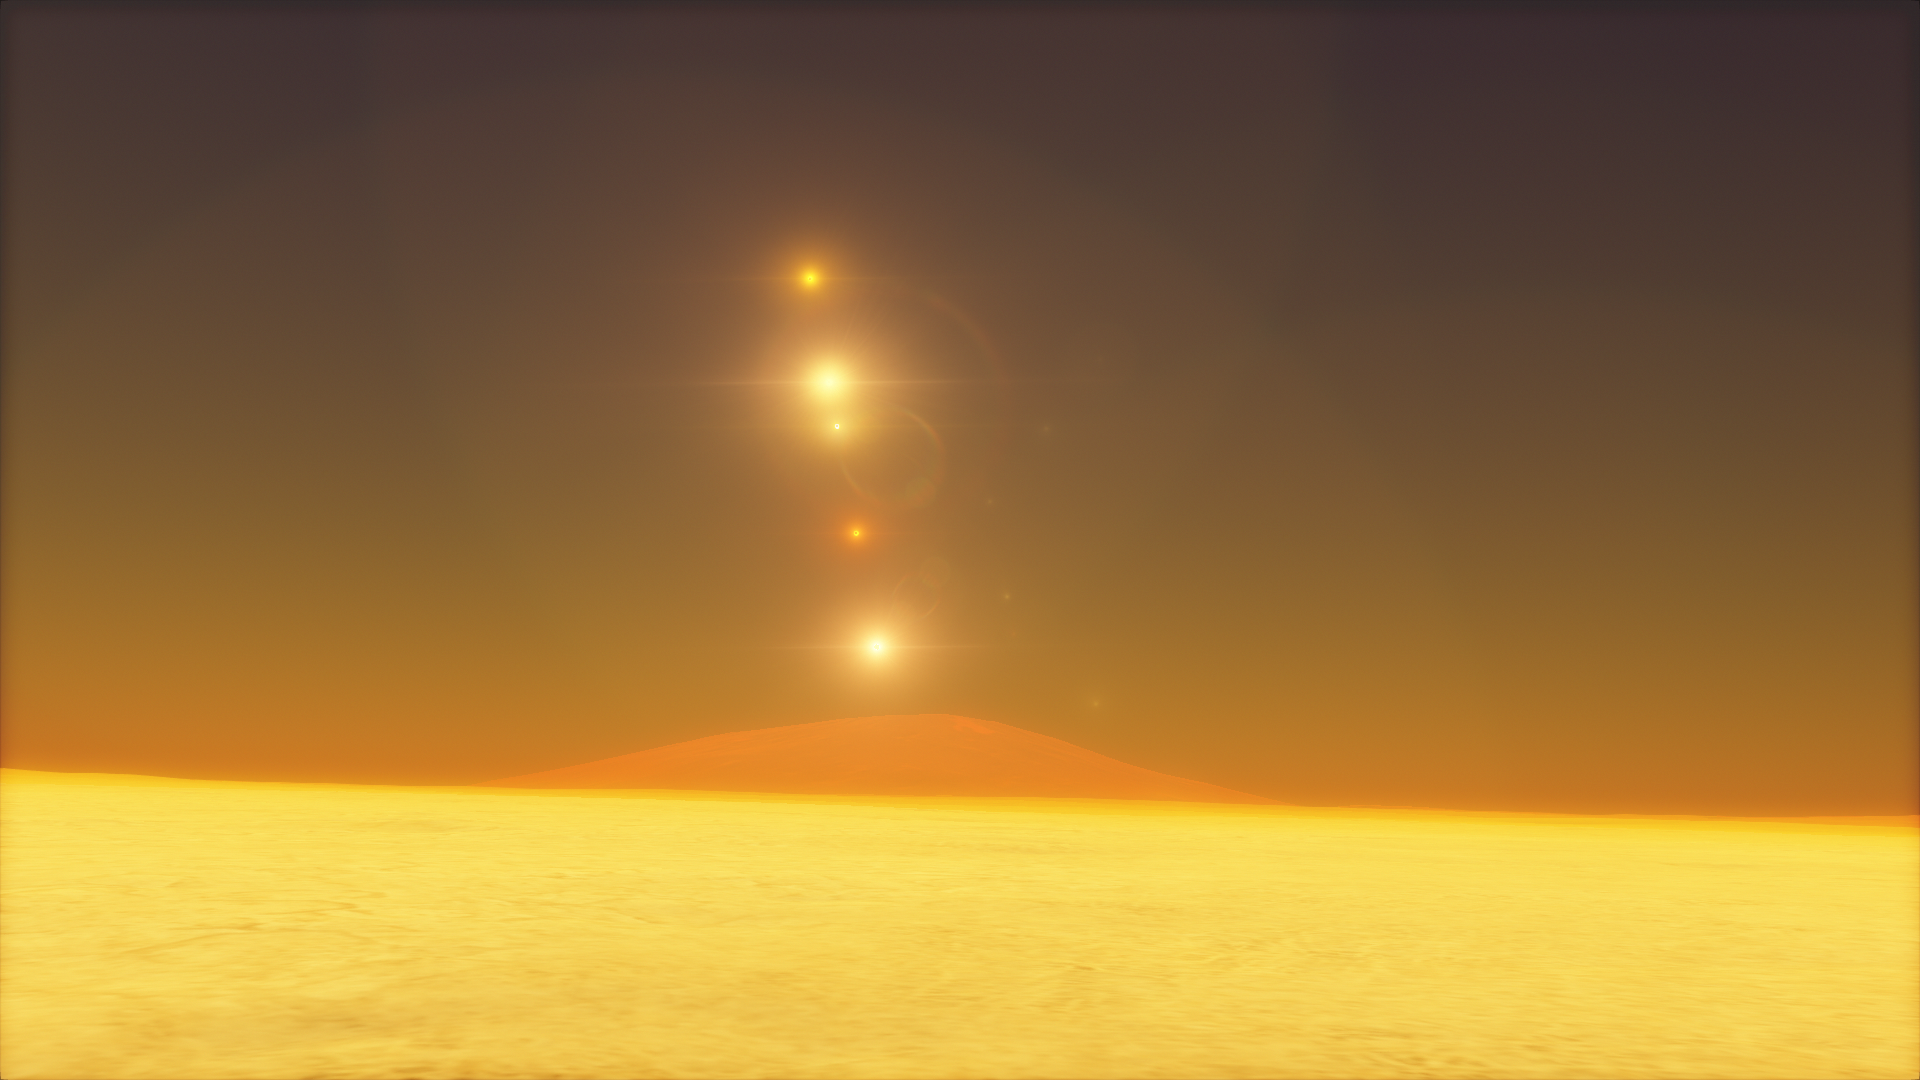 The Kalgash 5 system, as seen from the ground, with stars raising above a volcano.